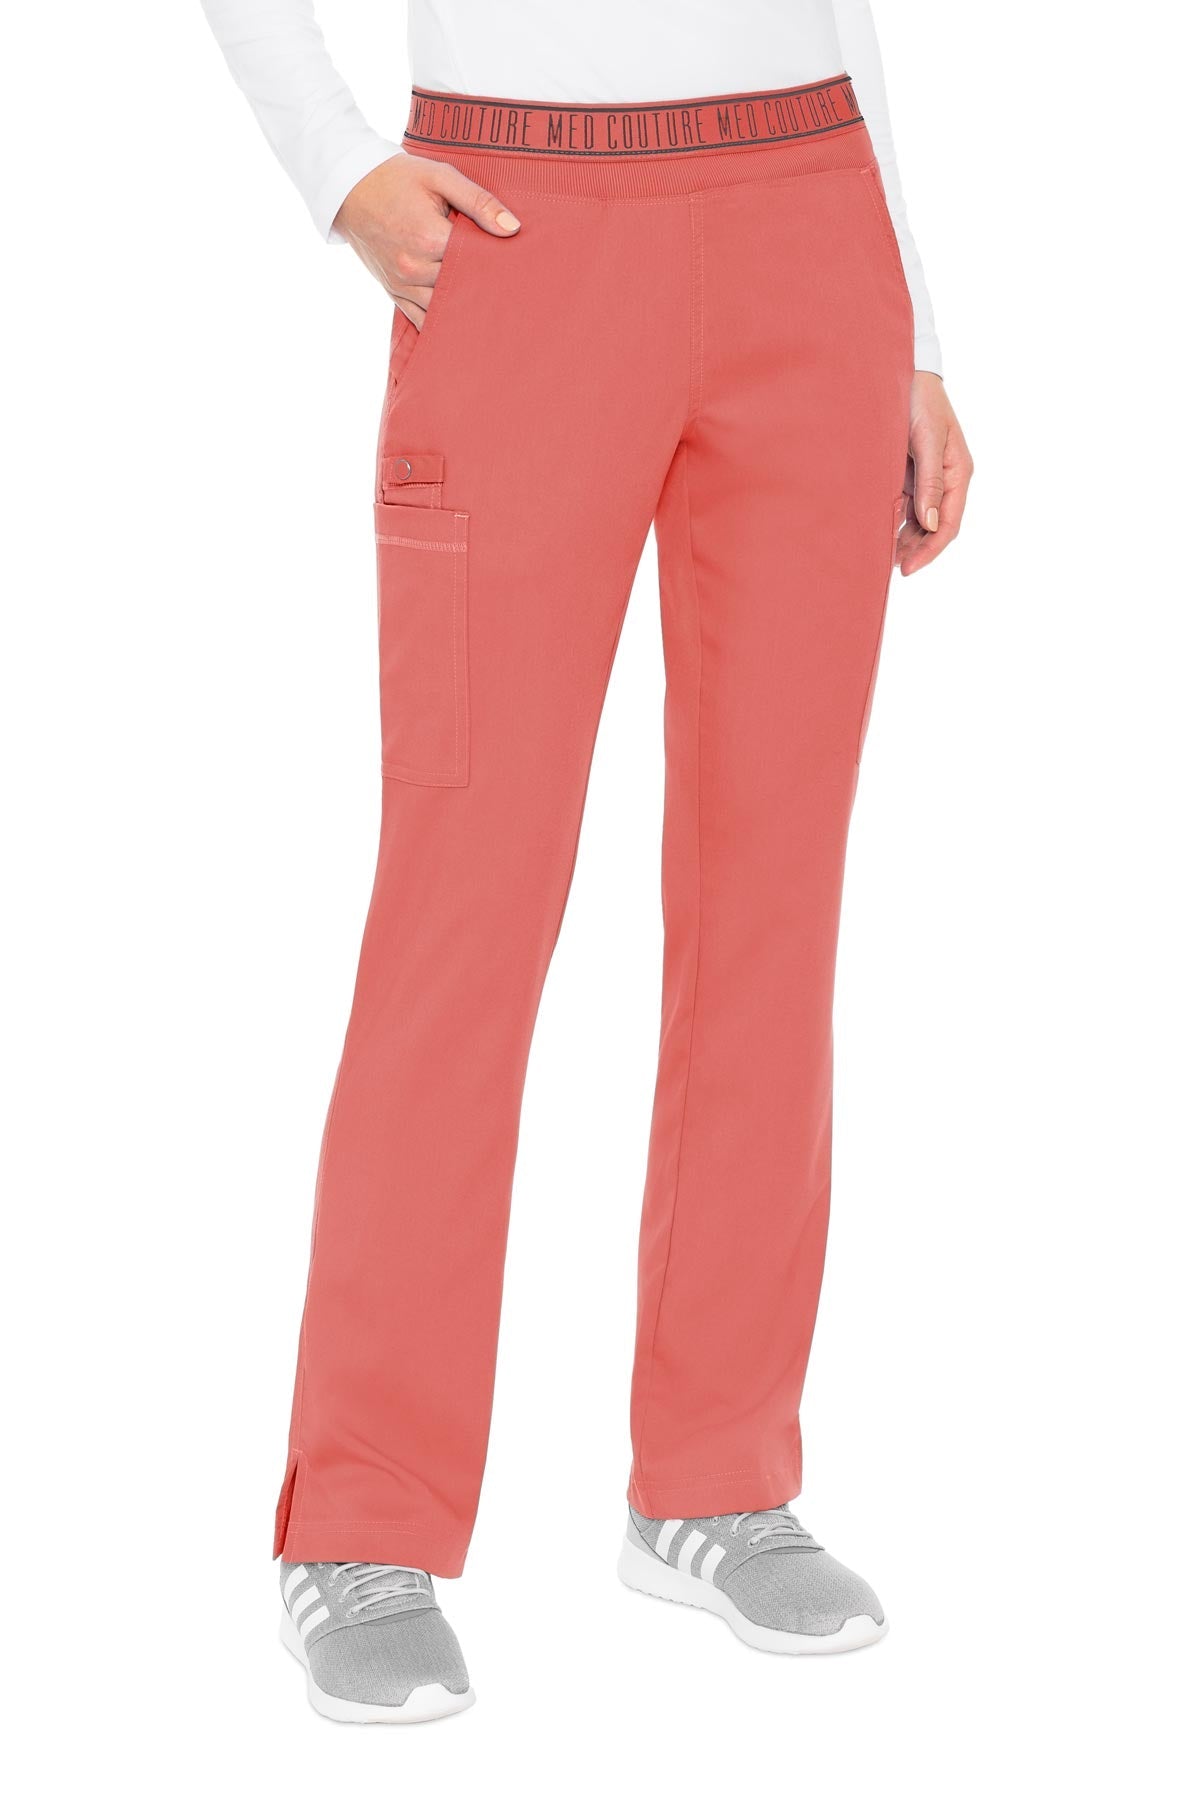 Med Couture Coral PANT